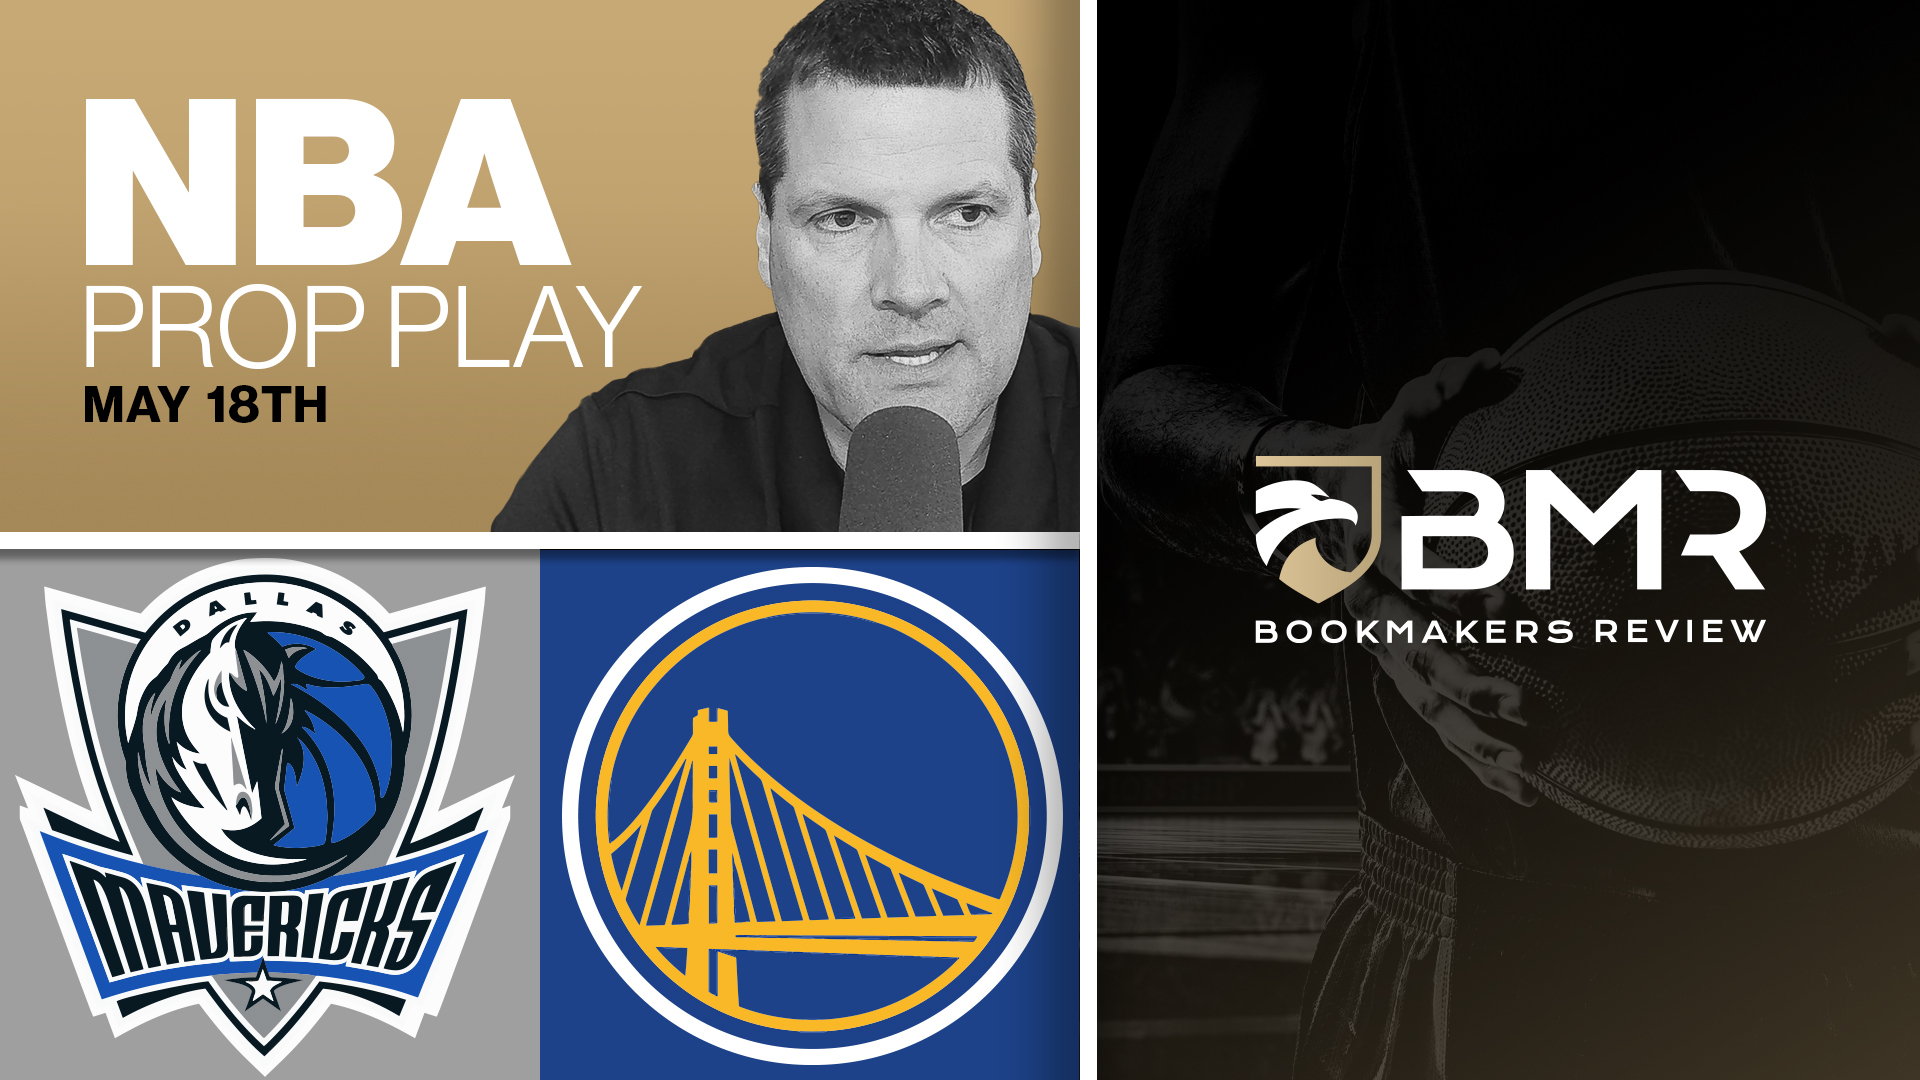 Mavericks vs. Warriors | Free NBA Playoffs Player Prop Pick by Donnie RightSide - May 18th